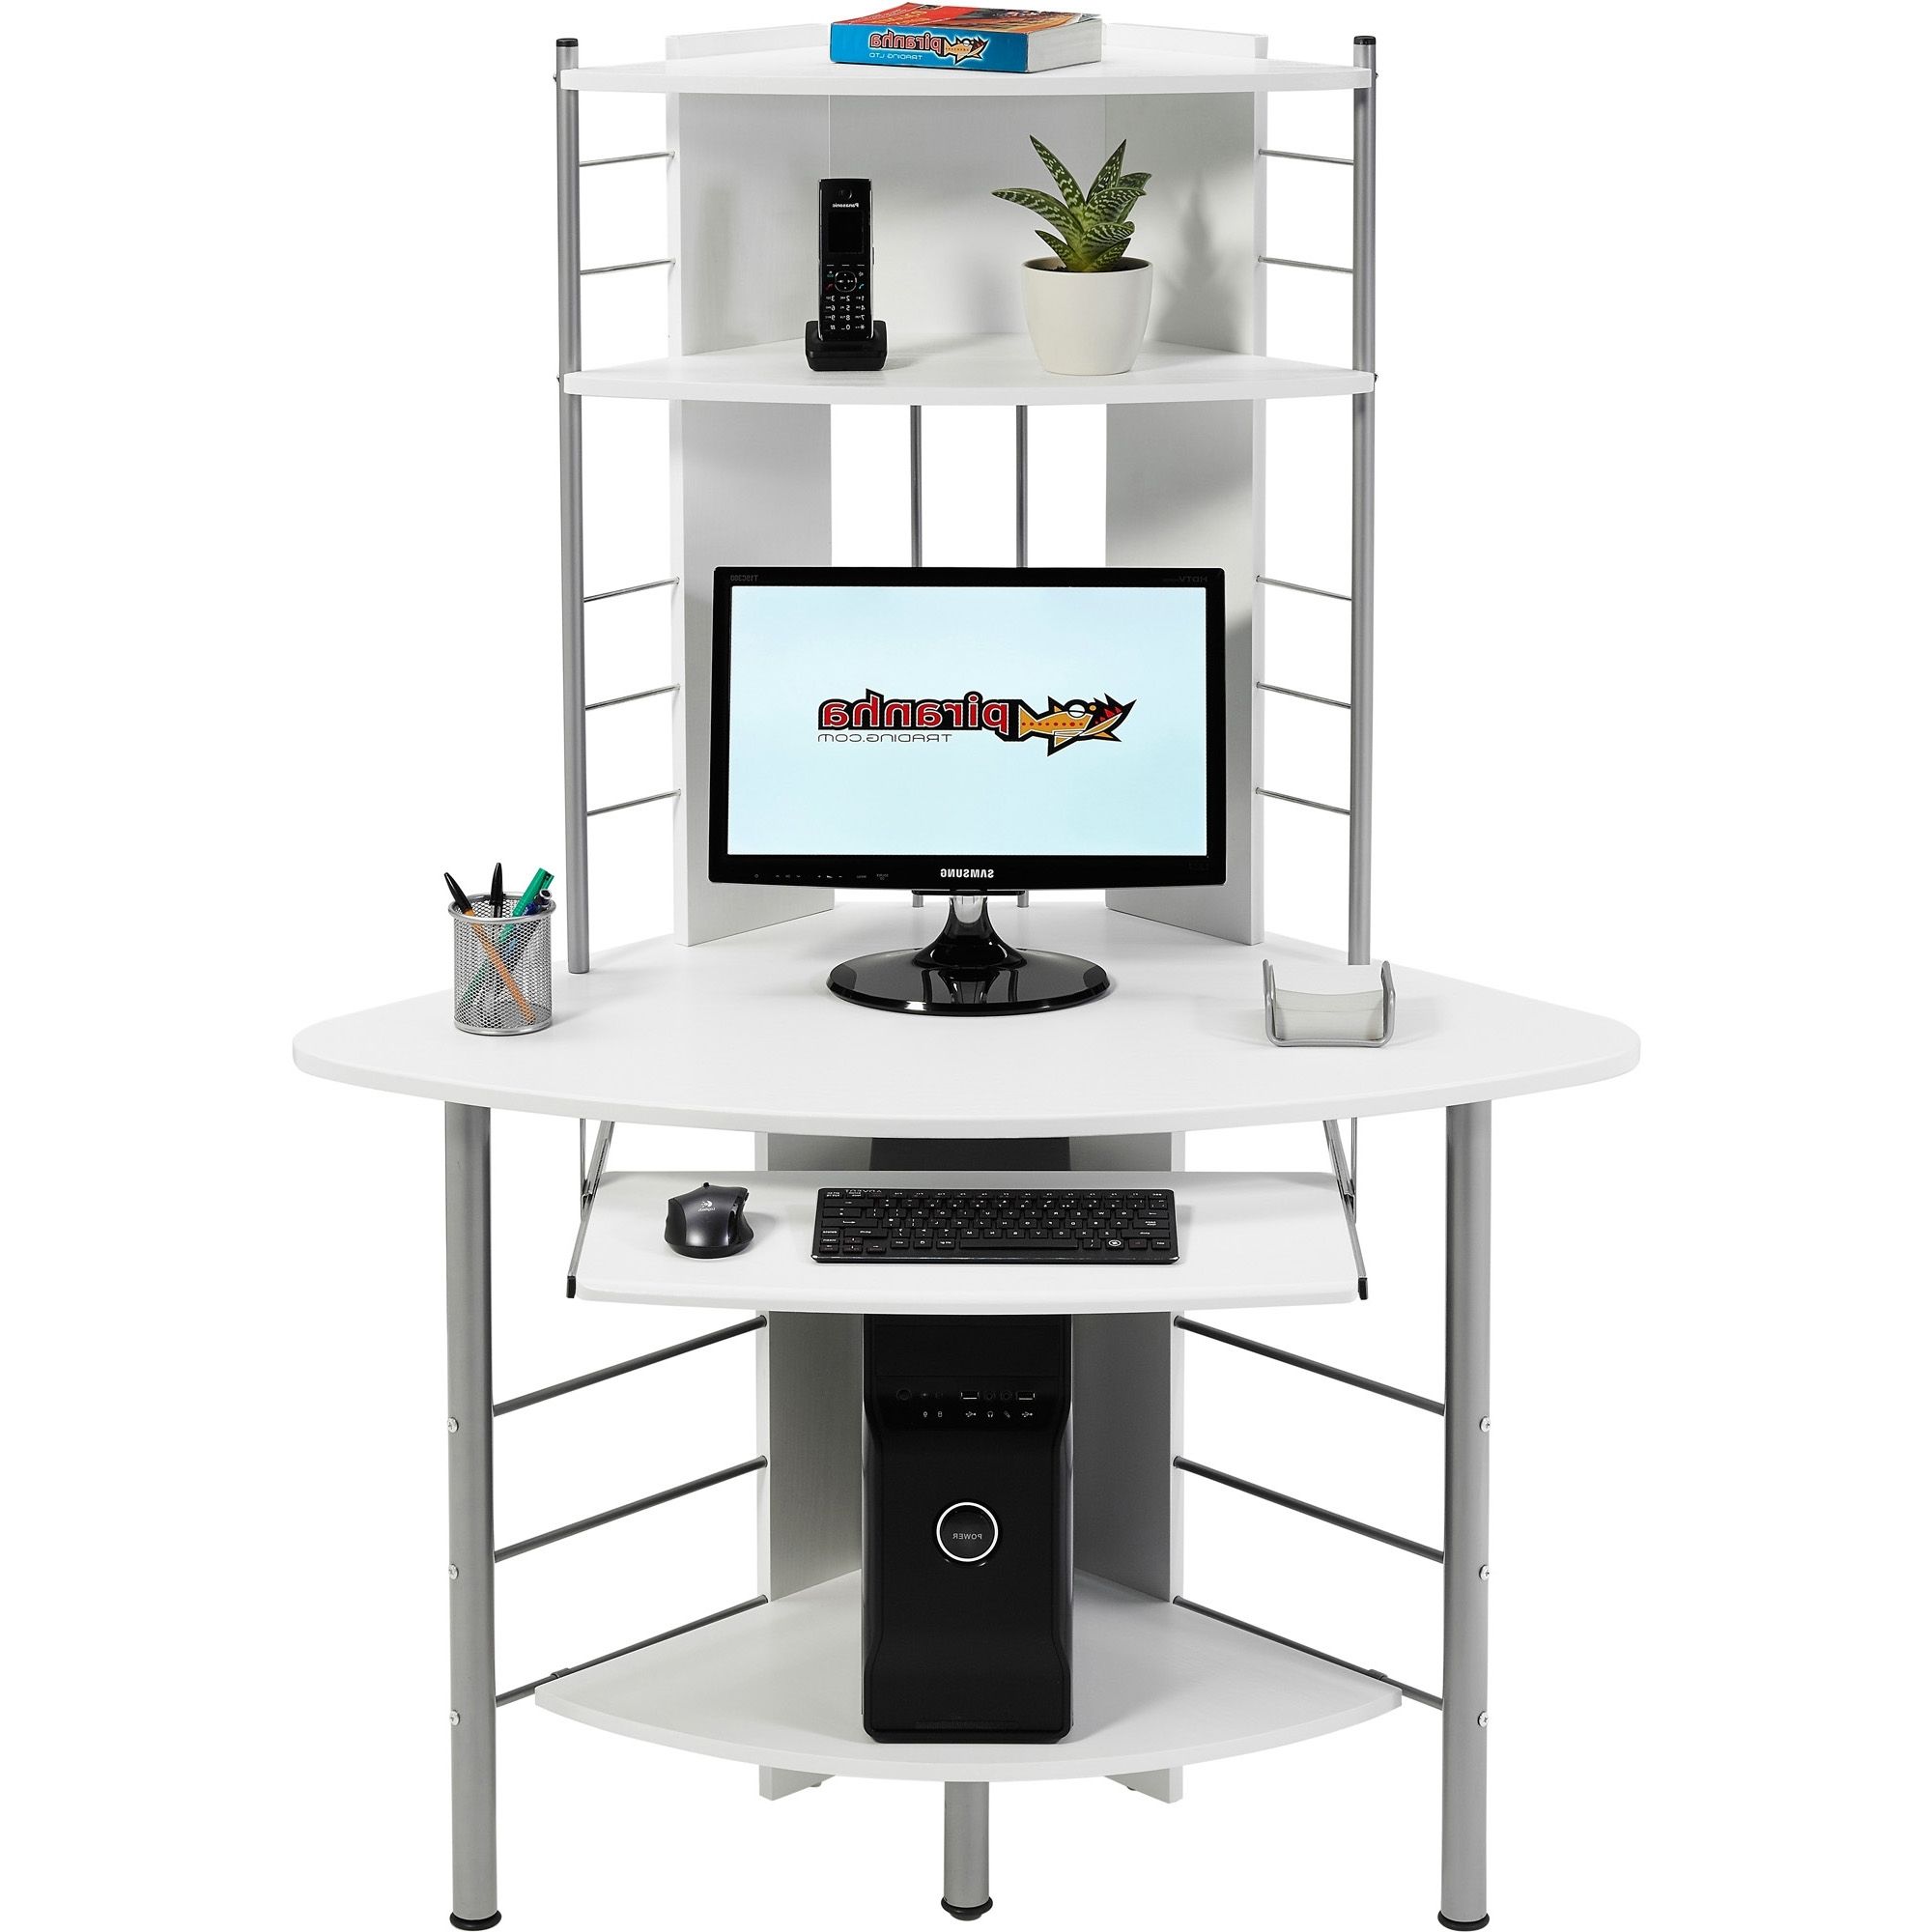 Most Recently Released Piranha Quality Compact Corner Computer Desk With Shelves For Home Regarding Quality Computer Desks (View 5 of 20)